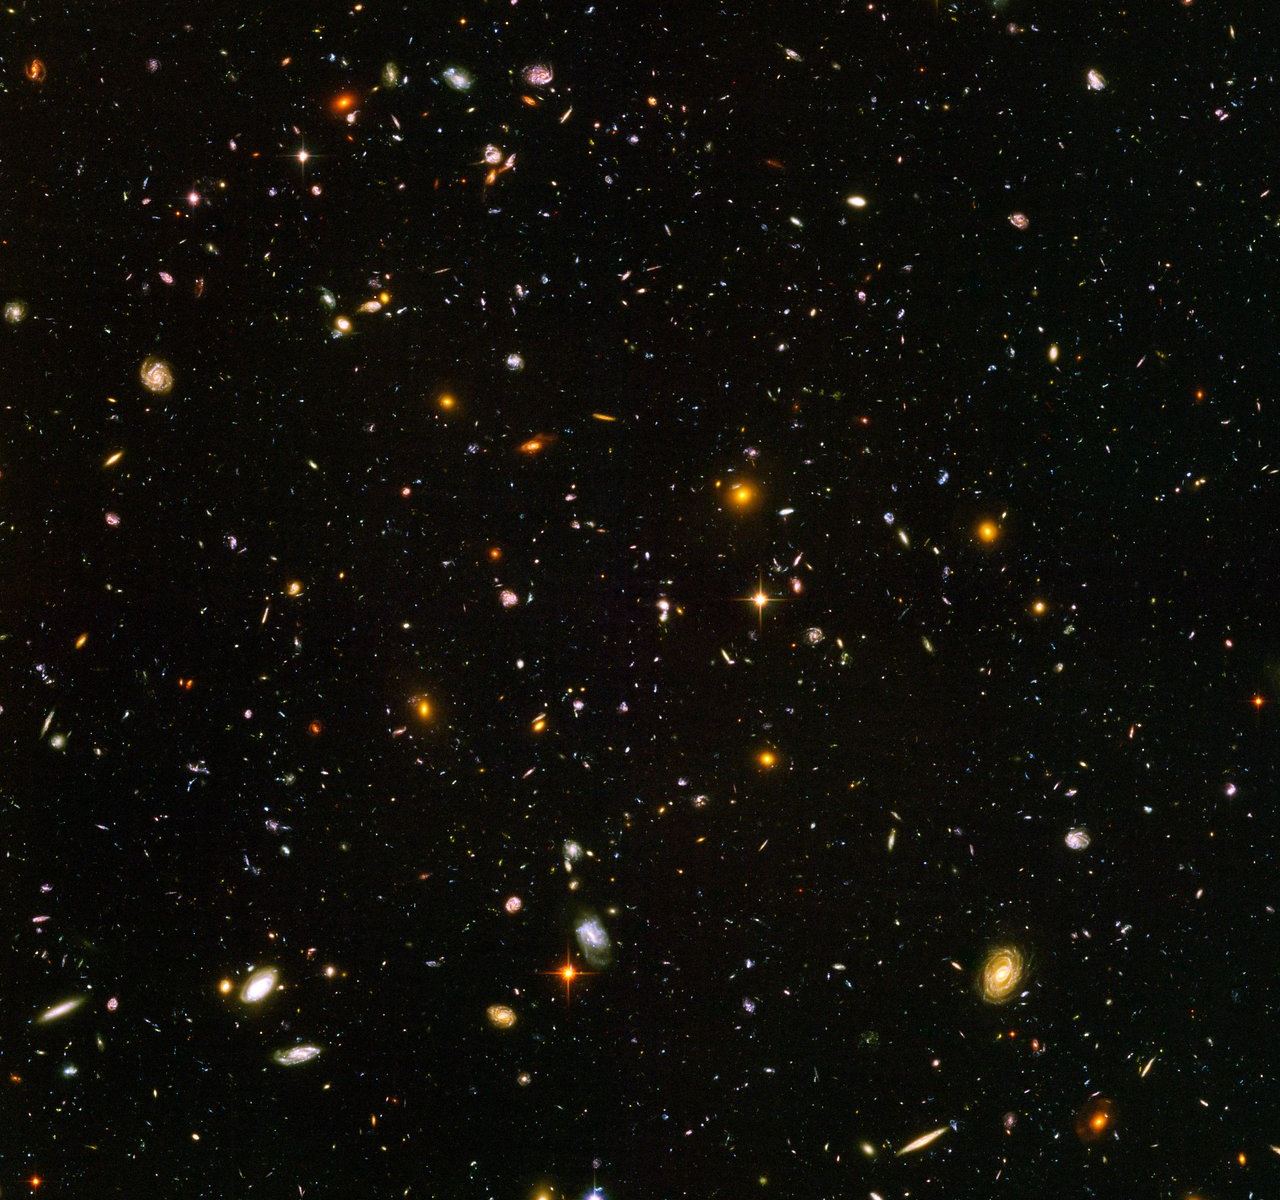 This view of nearly 10,000 galaxies is called the Hubble Ultra Deep Field. It shows some galaxies in the early Universe, (which appear as red blobs). Credit: NASA/ESA/HUDF